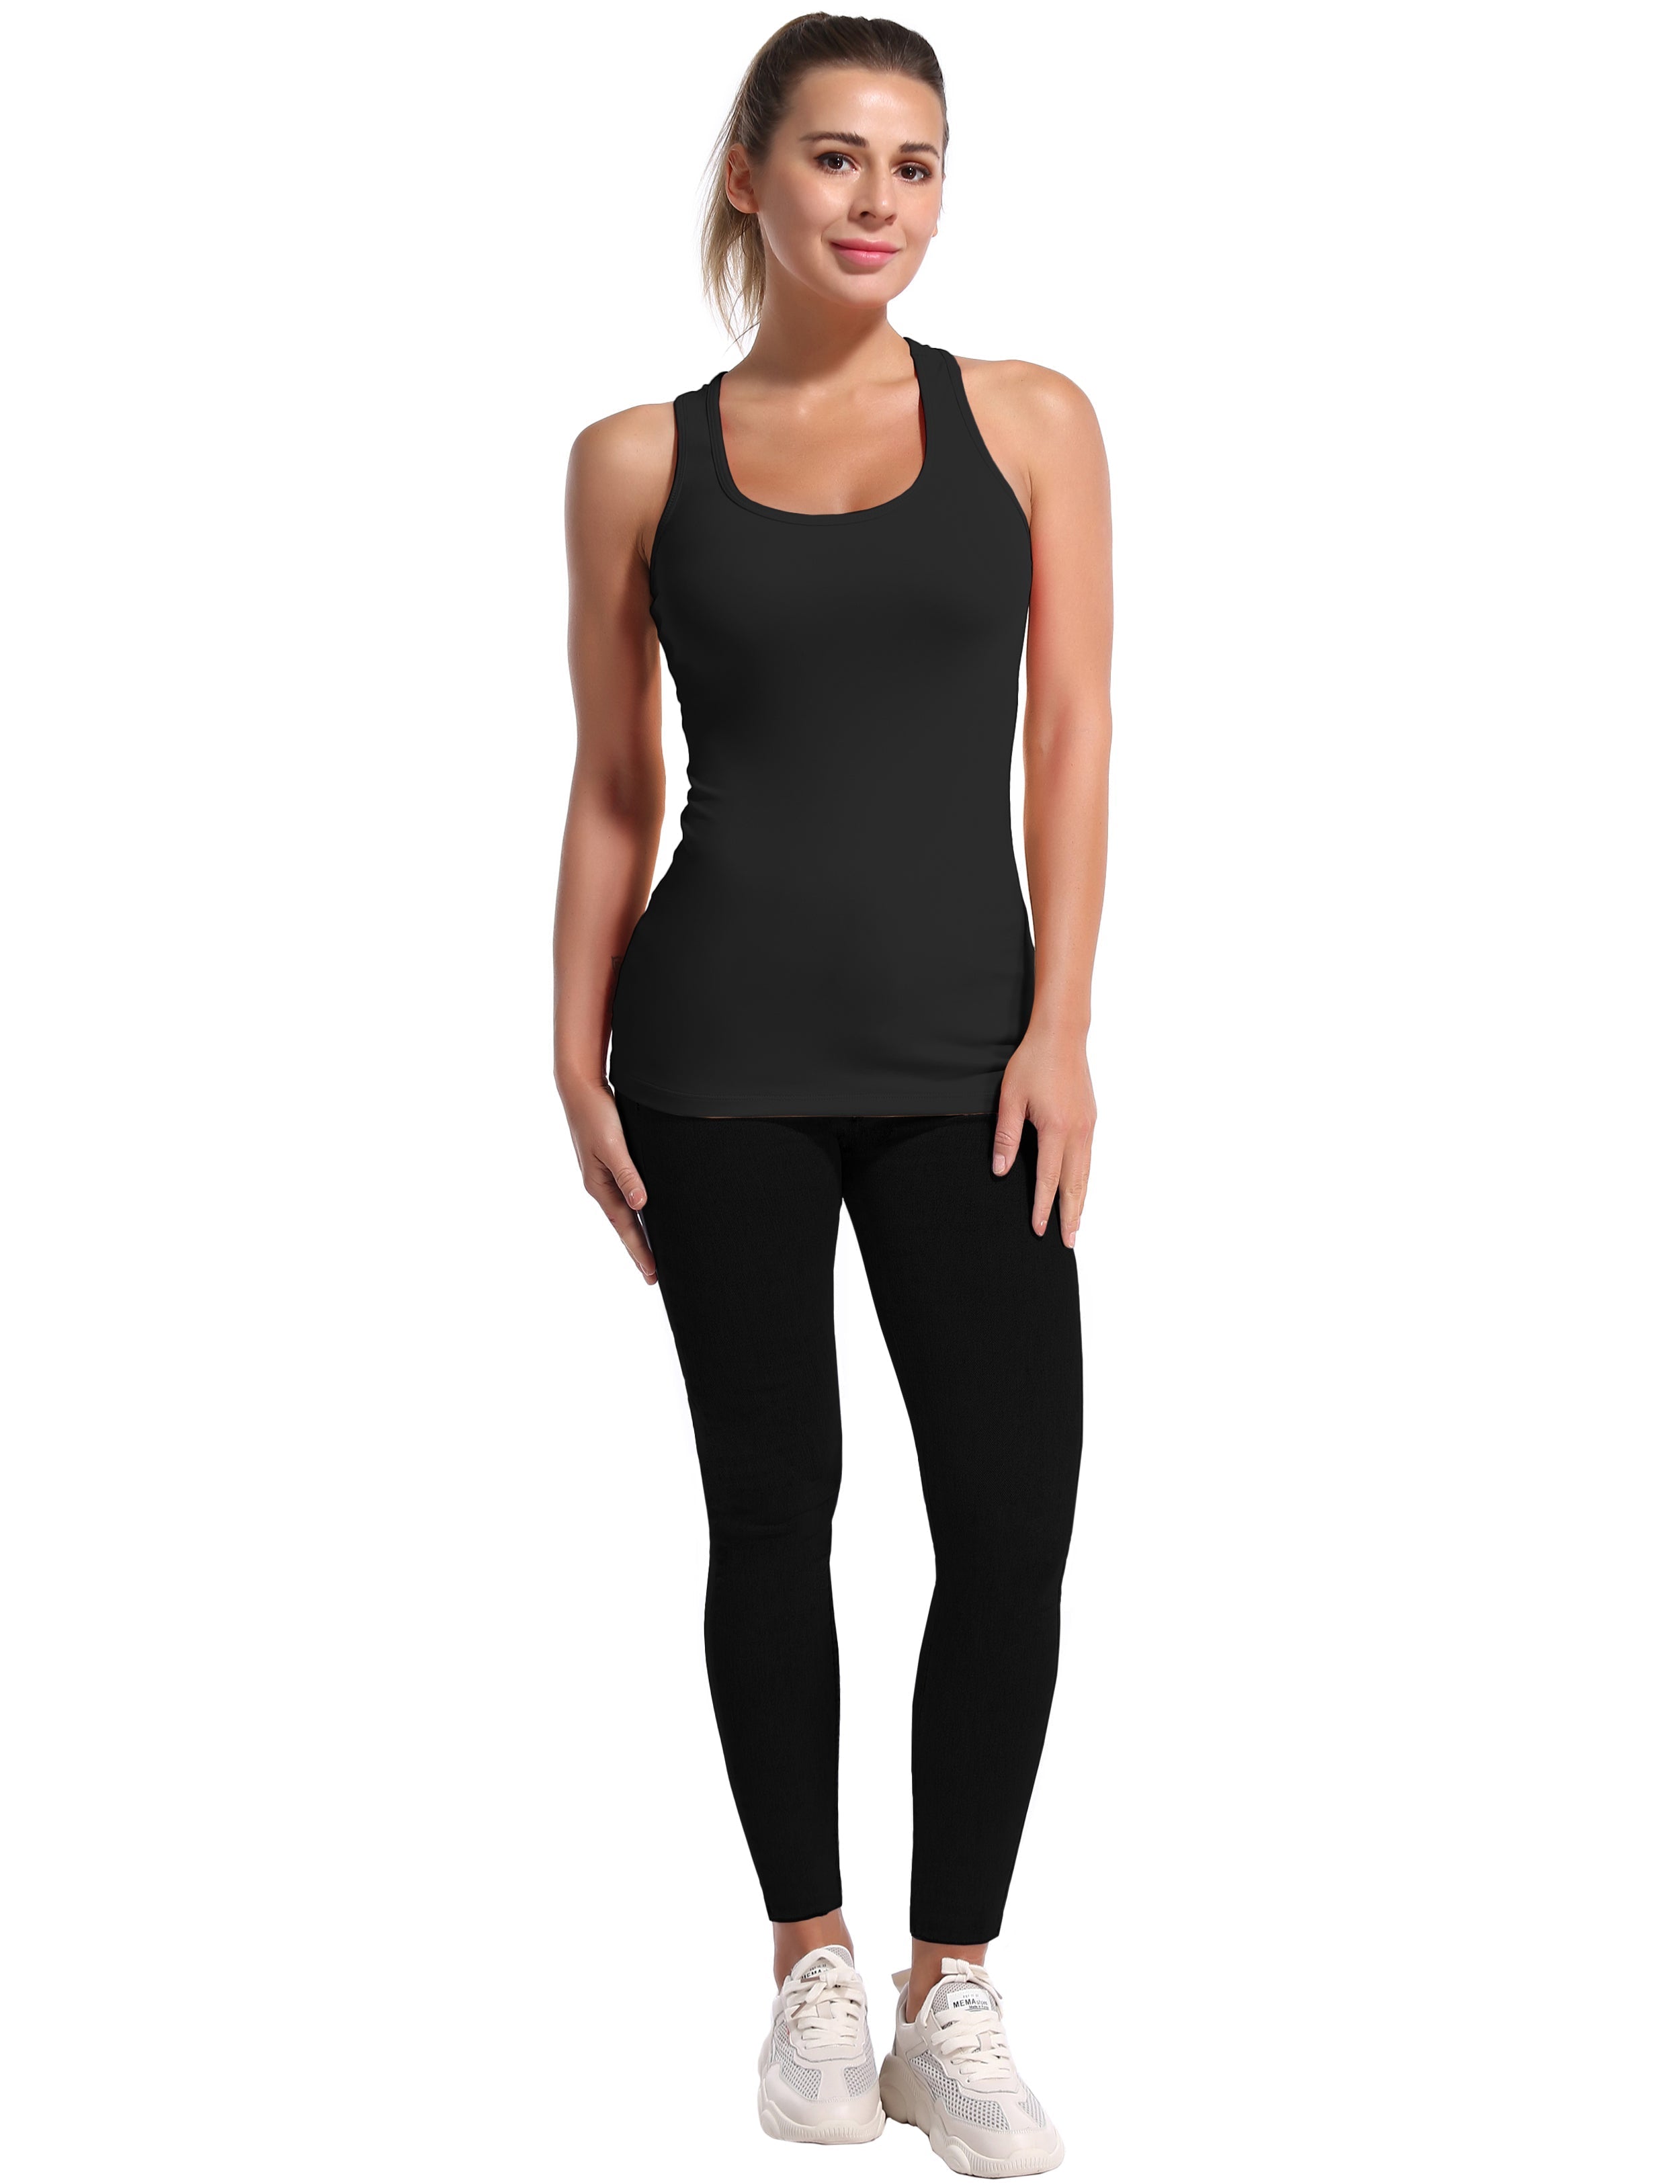 Racerback Athletic Tank Tops black 92%Nylon/8%Spandex(Cotton Soft) Designed for Tall Size Tight Fit So buttery soft, it feels weightless Sweat-wicking Four-way stretch Breathable Contours your body Sits below the waistband for moderate, everyday coverage